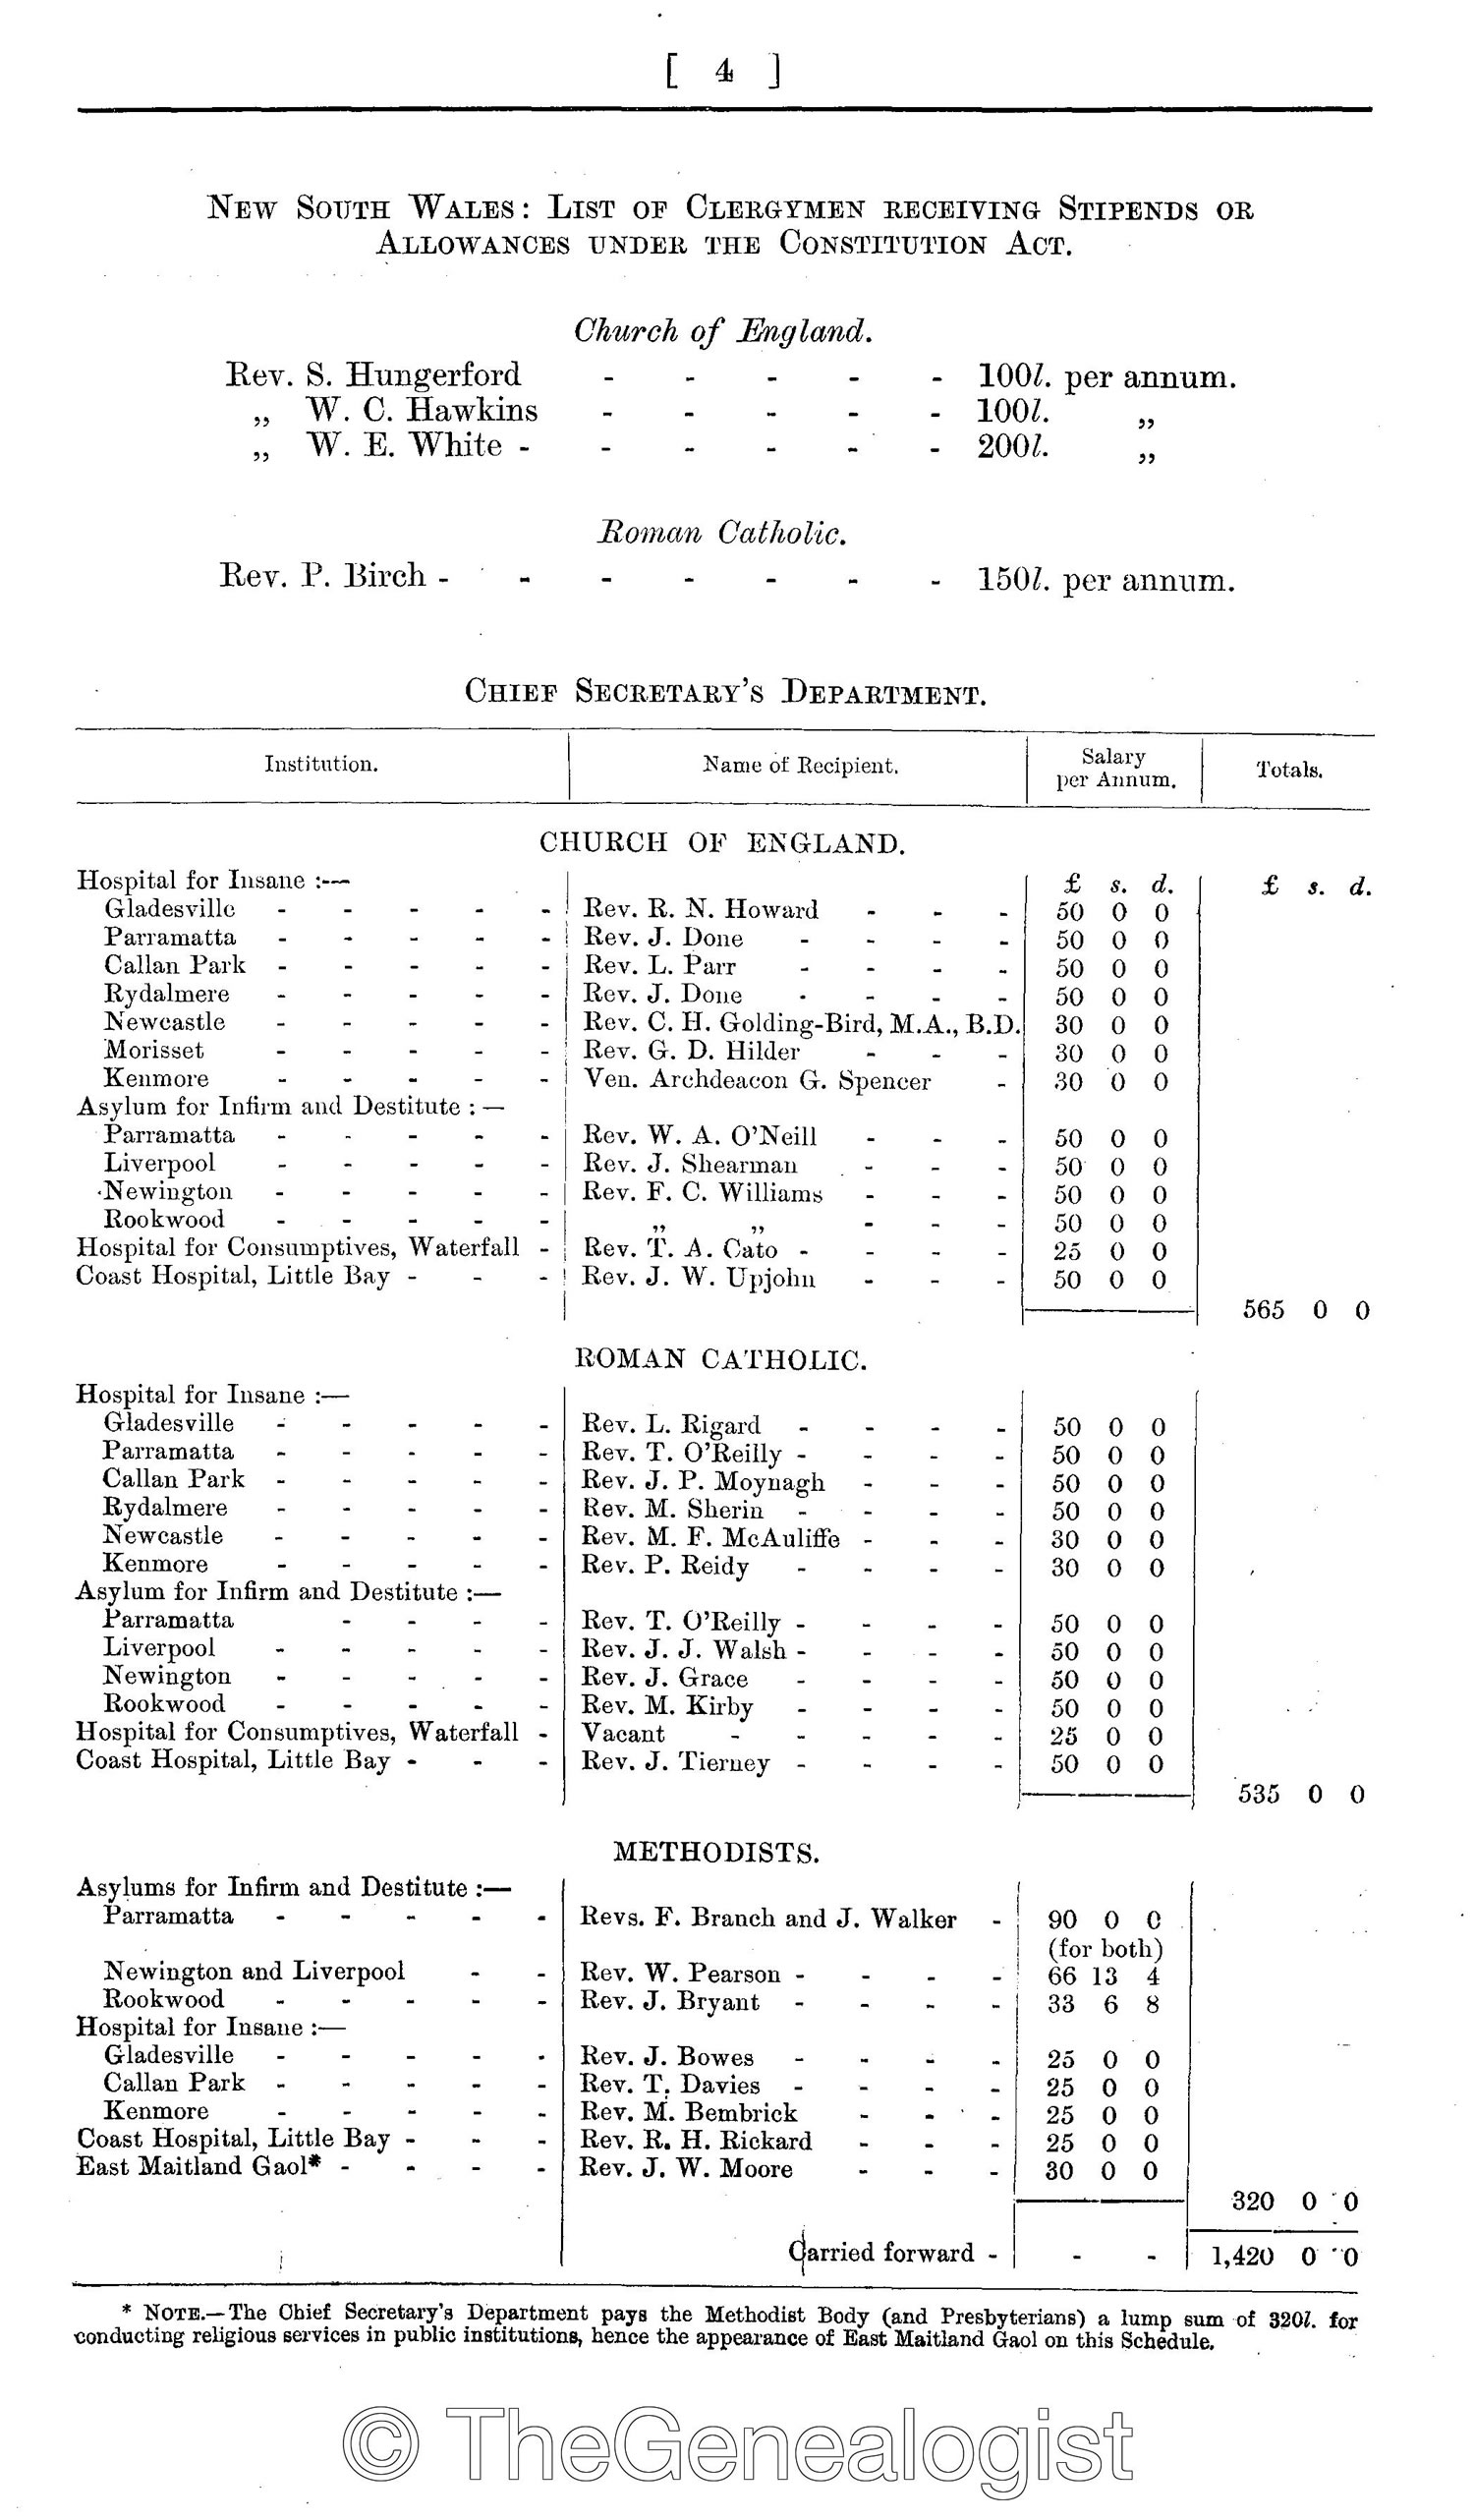 Return of the Names of Official Chaplains (Self Governing Dominions) 1910